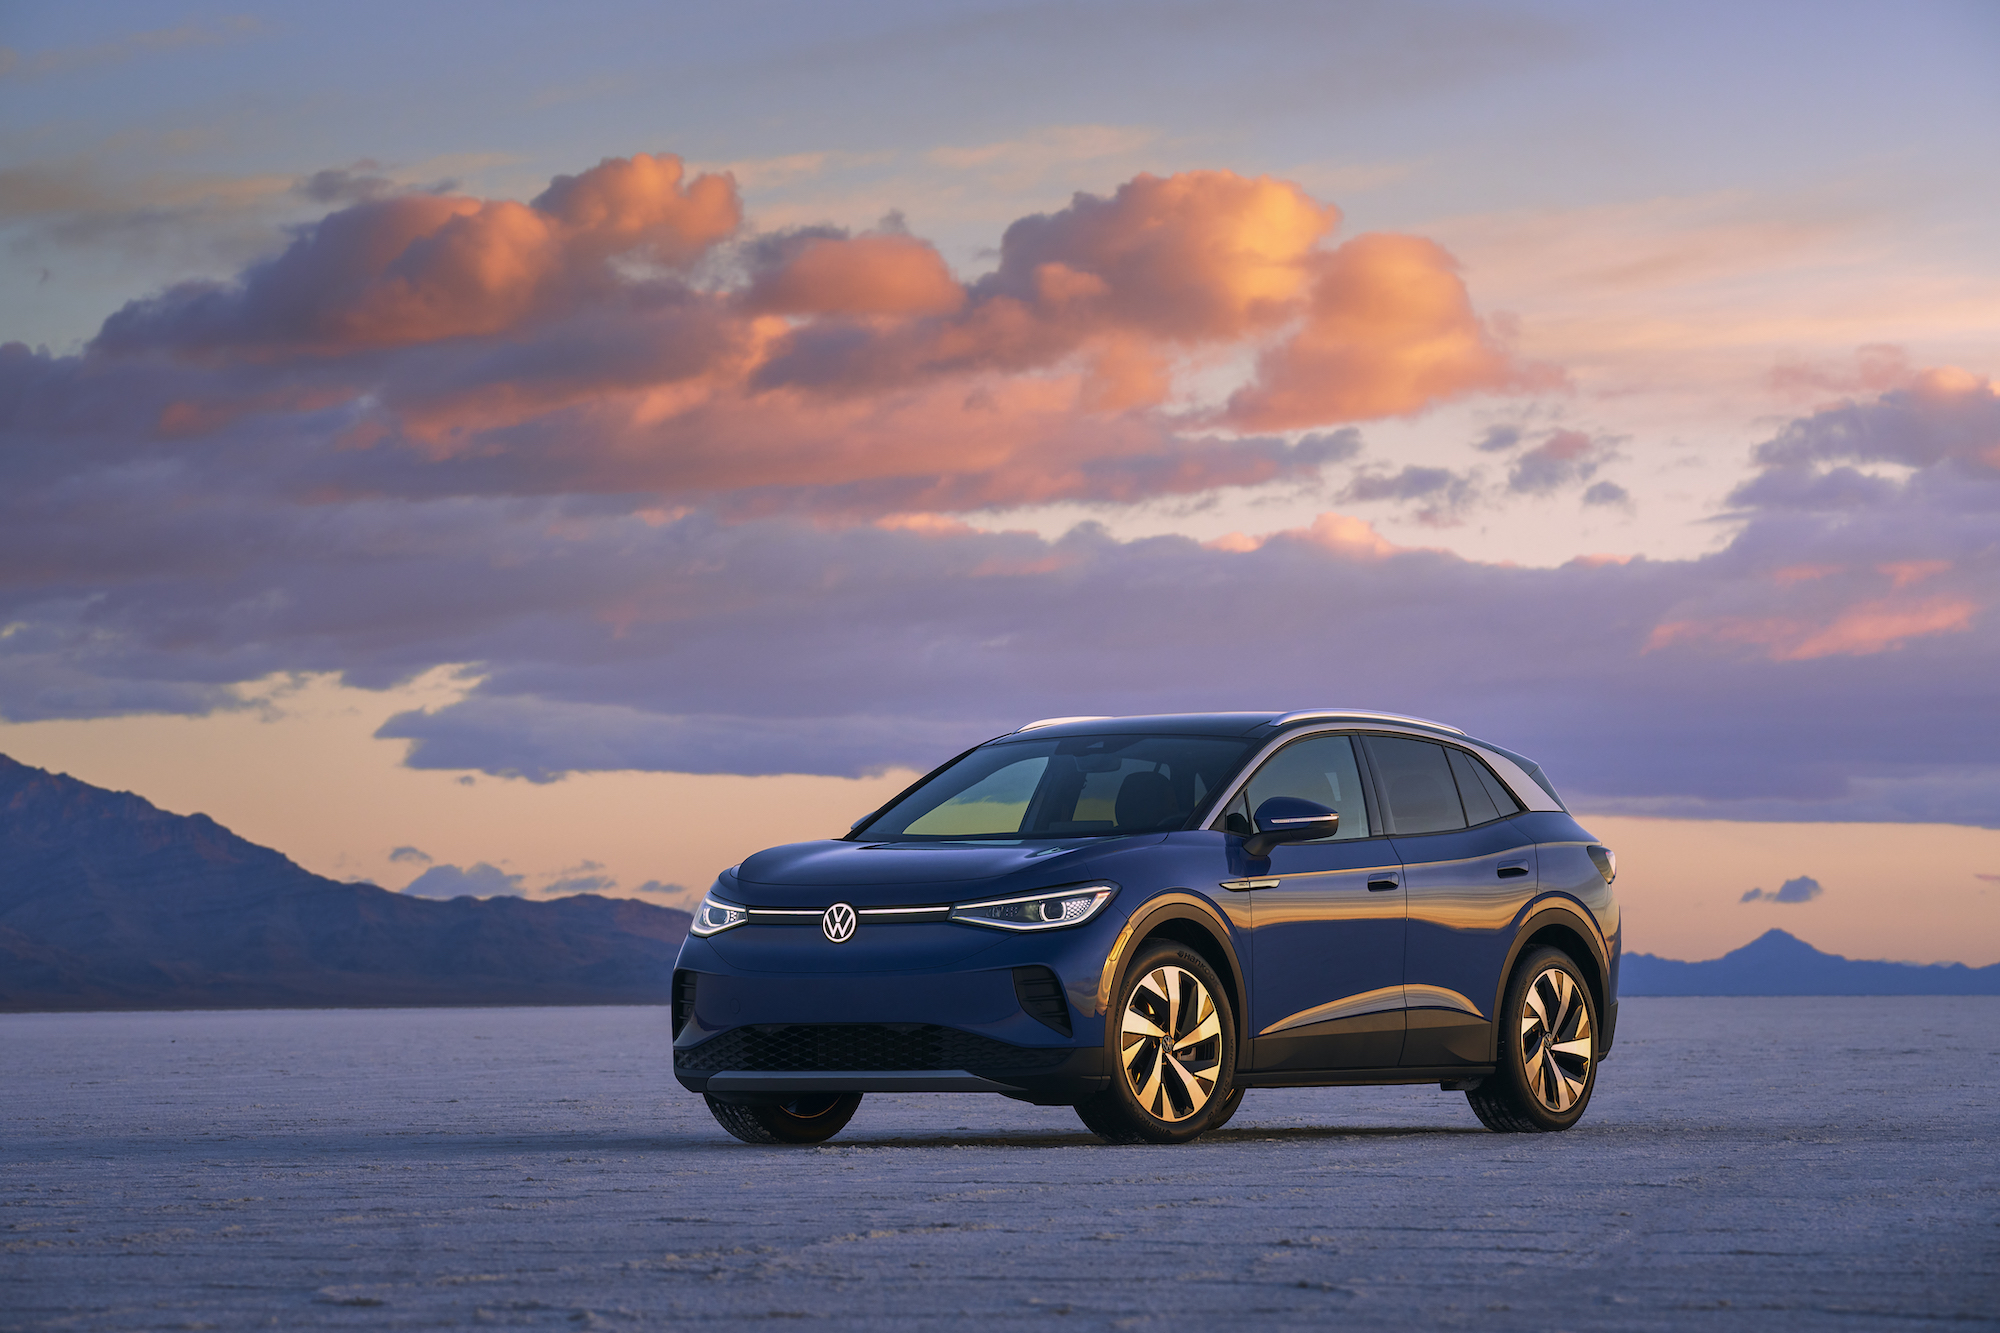 A blue 2021 Volkswagen ID.4 electric SUV parked in a desert at sunset